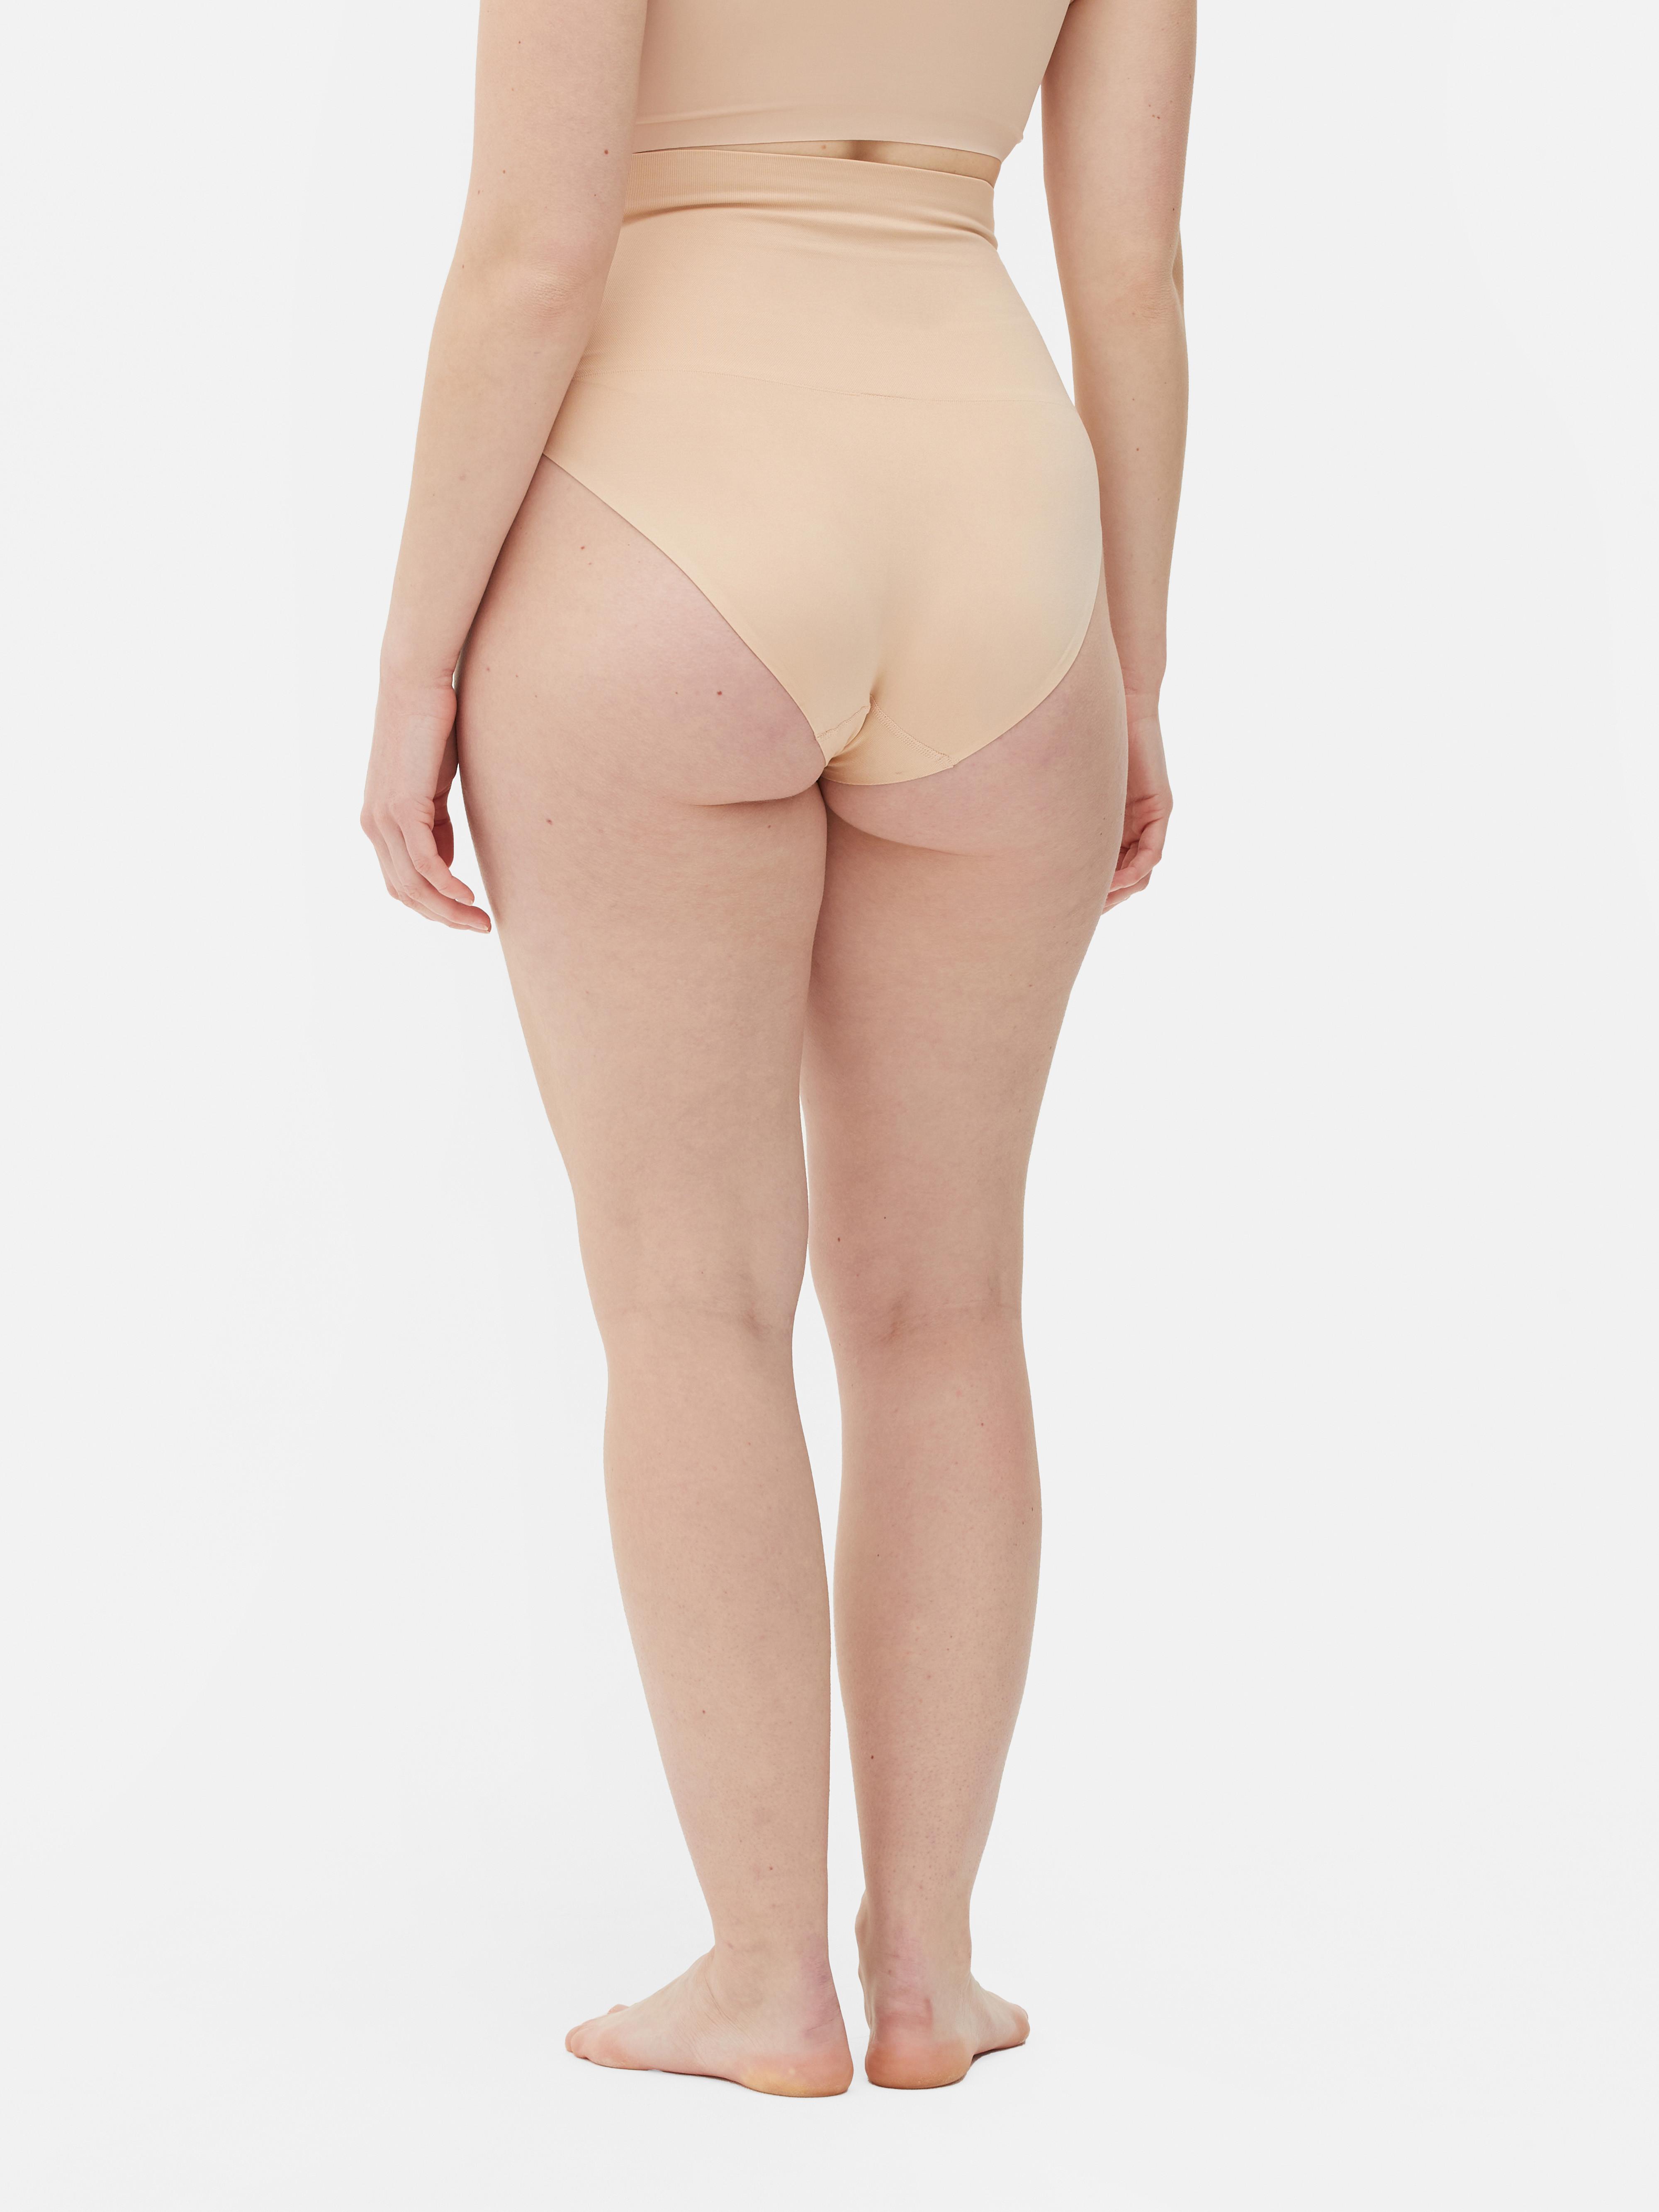 GeorgiaOliver on X: Wow, can you believe primark are selling womans bum  padded underwear! 😳  / X